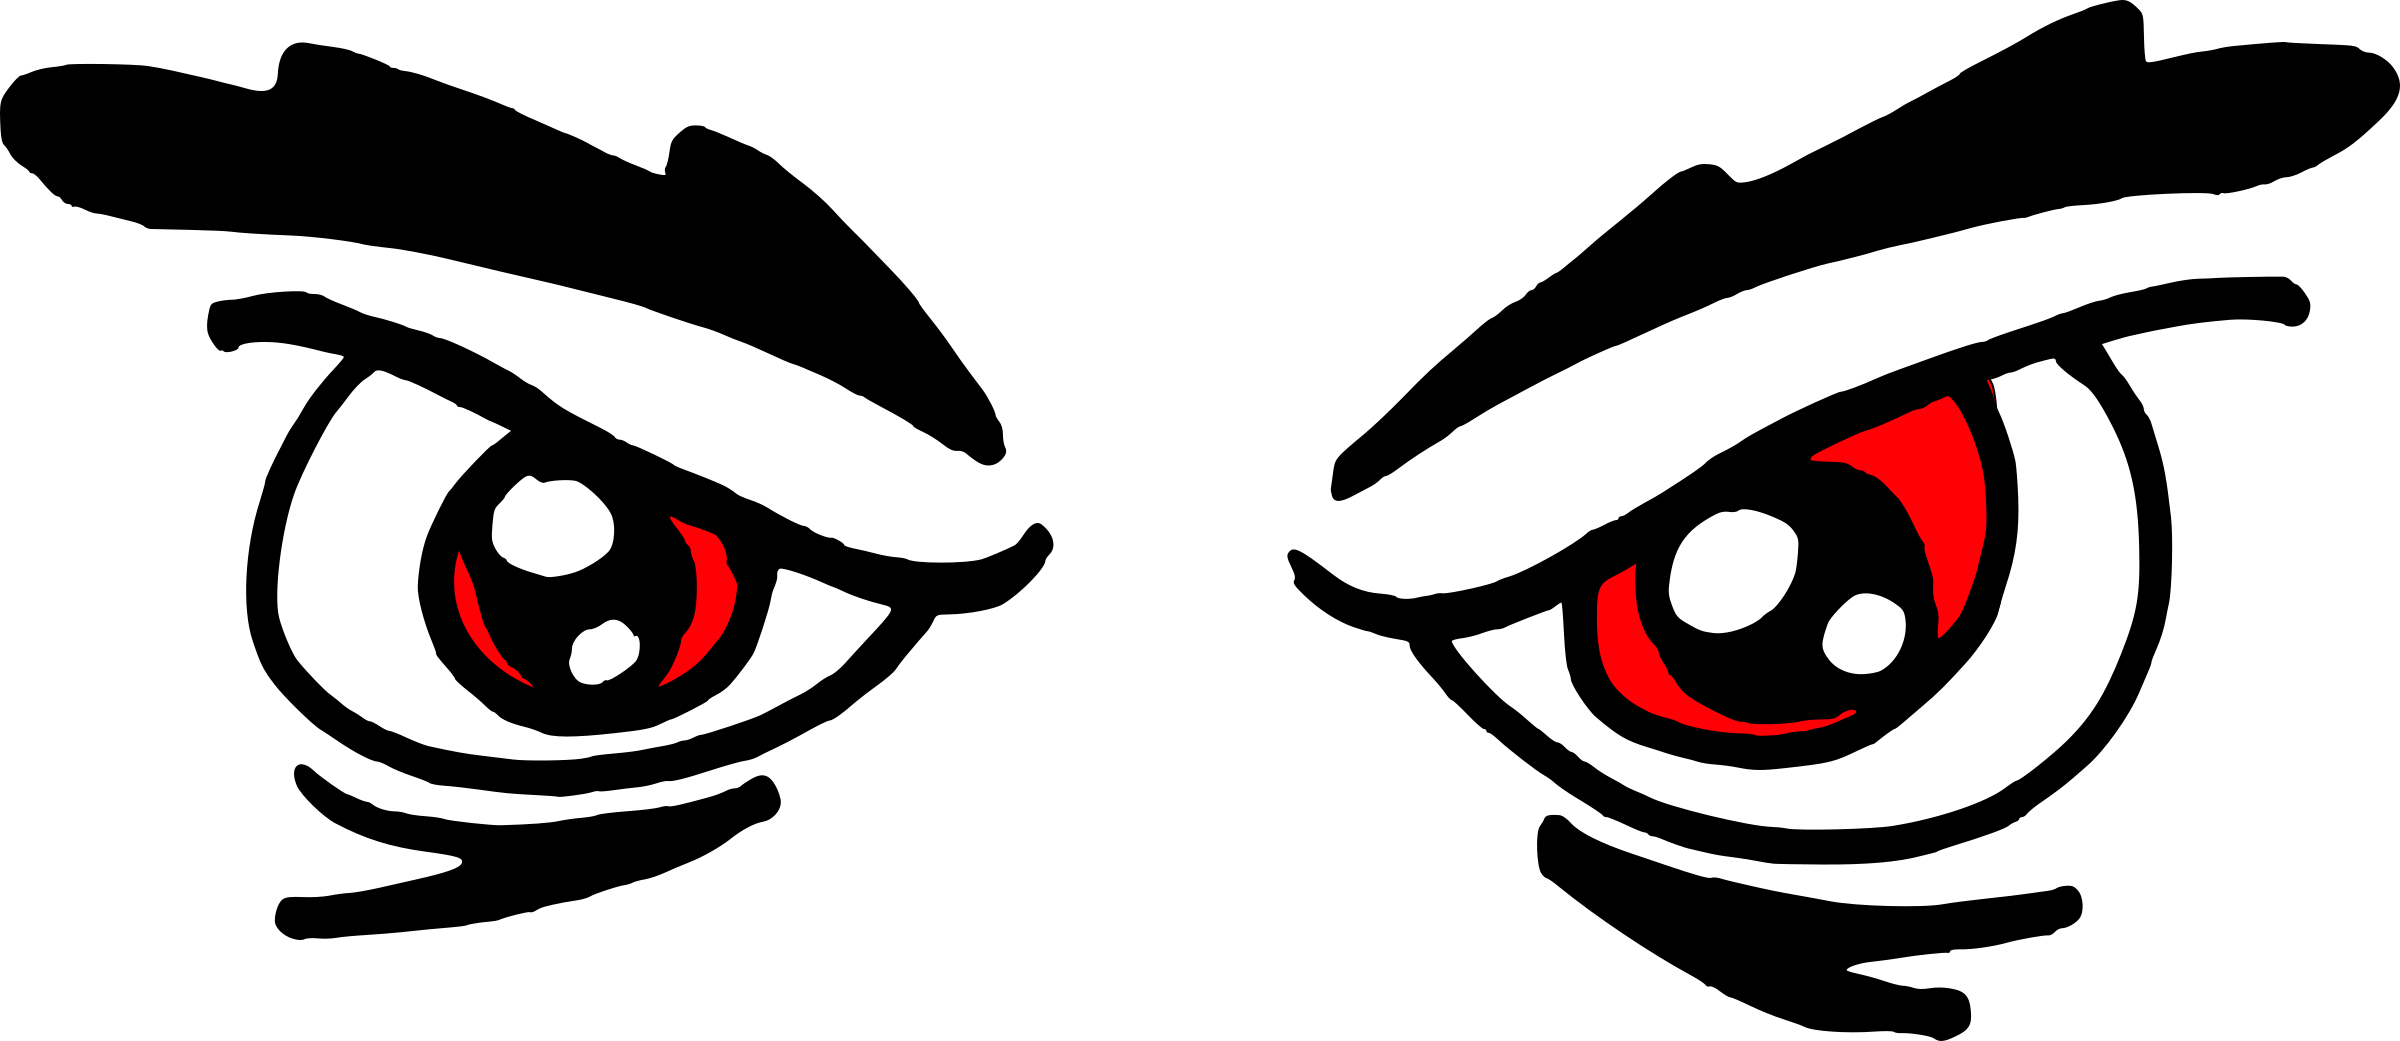 Red eyes big image. Eye clipart angry